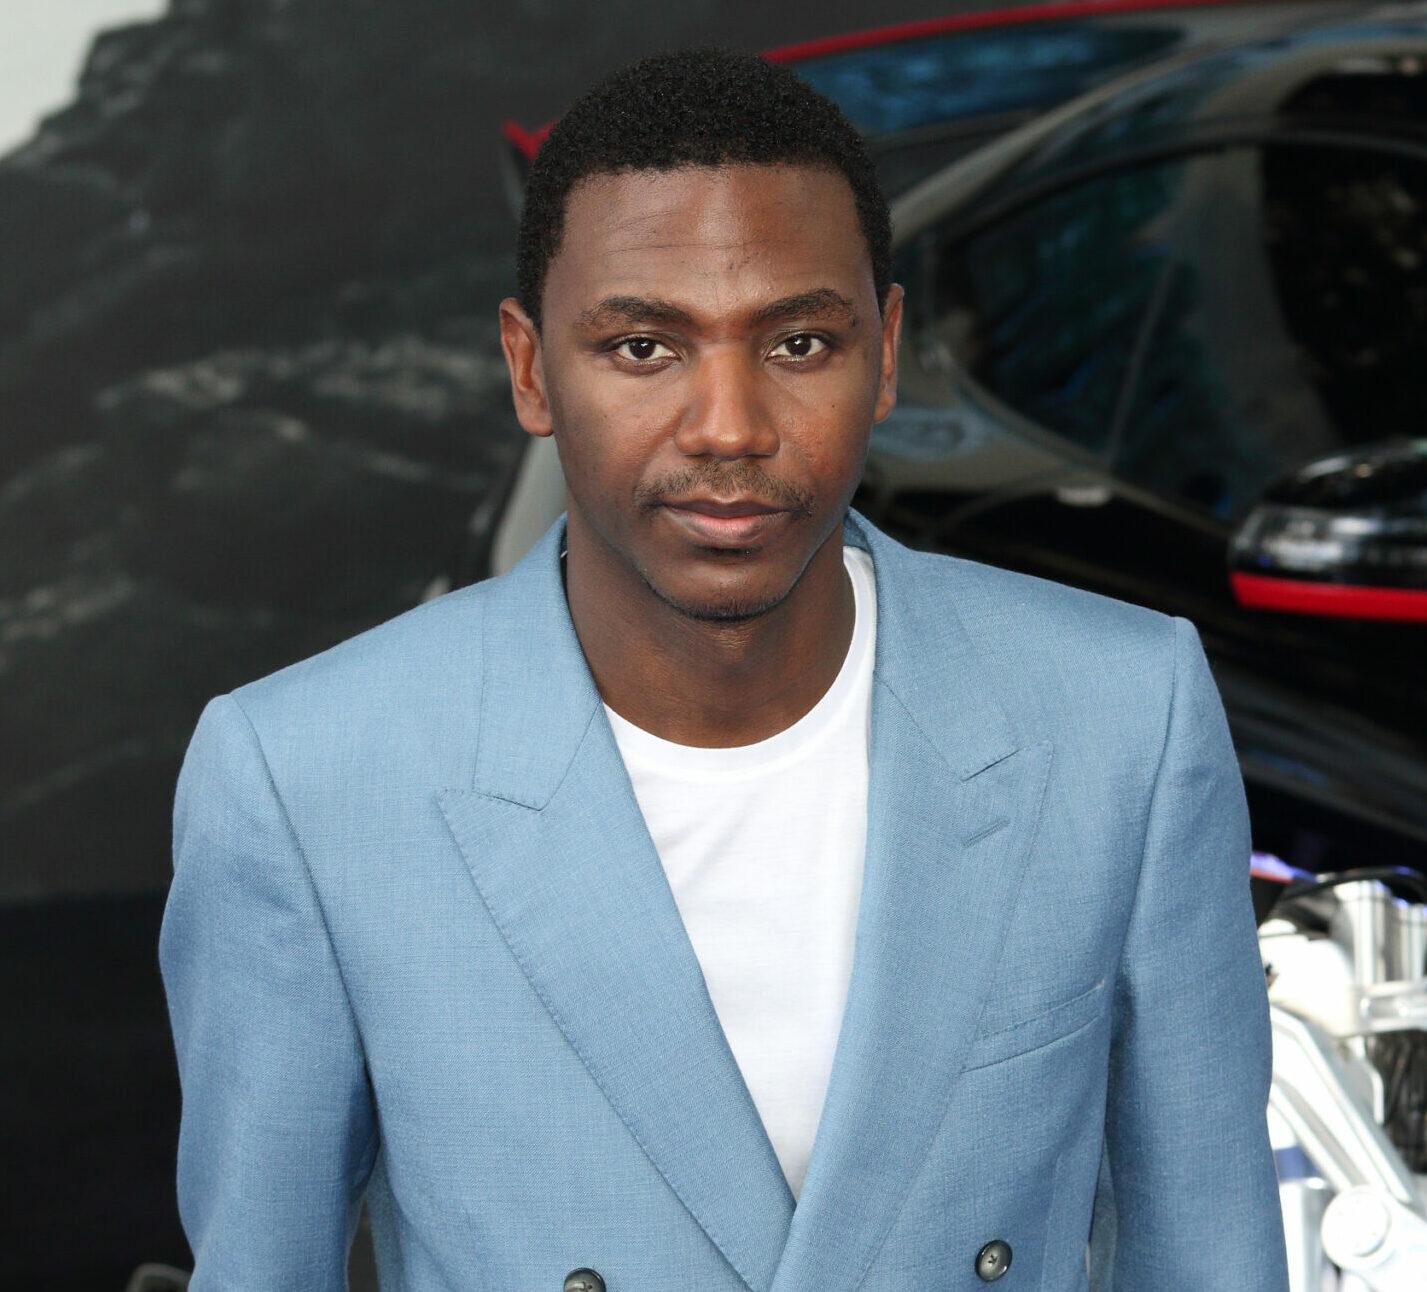 London, UK. Jerrod Carmichael at Transformers: The Last Knight - Global Film Premiere at Leicester Square, London on Sunday June 18th 2017.